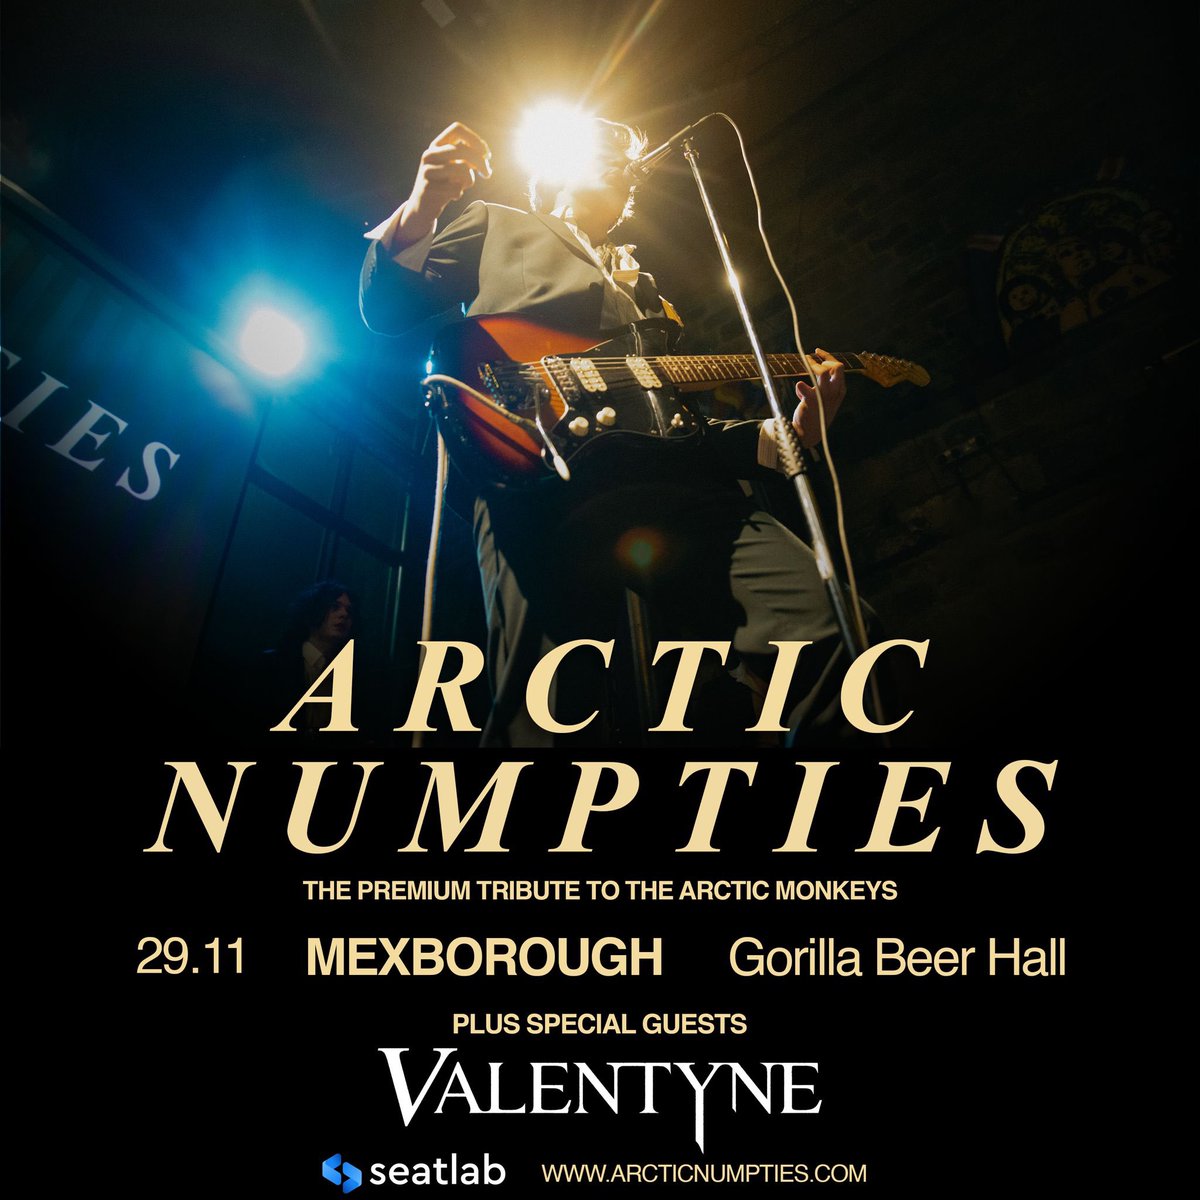 Friday 29 November The @arcticnumpties return to Mexborough! They've played the Meccie Riviera twice before and we can’t wait for them to come back! With special guests @ValentyneBand joining them as support. Tickets are on sale NOW: gorillabeerhall.seatlab.com/events/29-11-2…